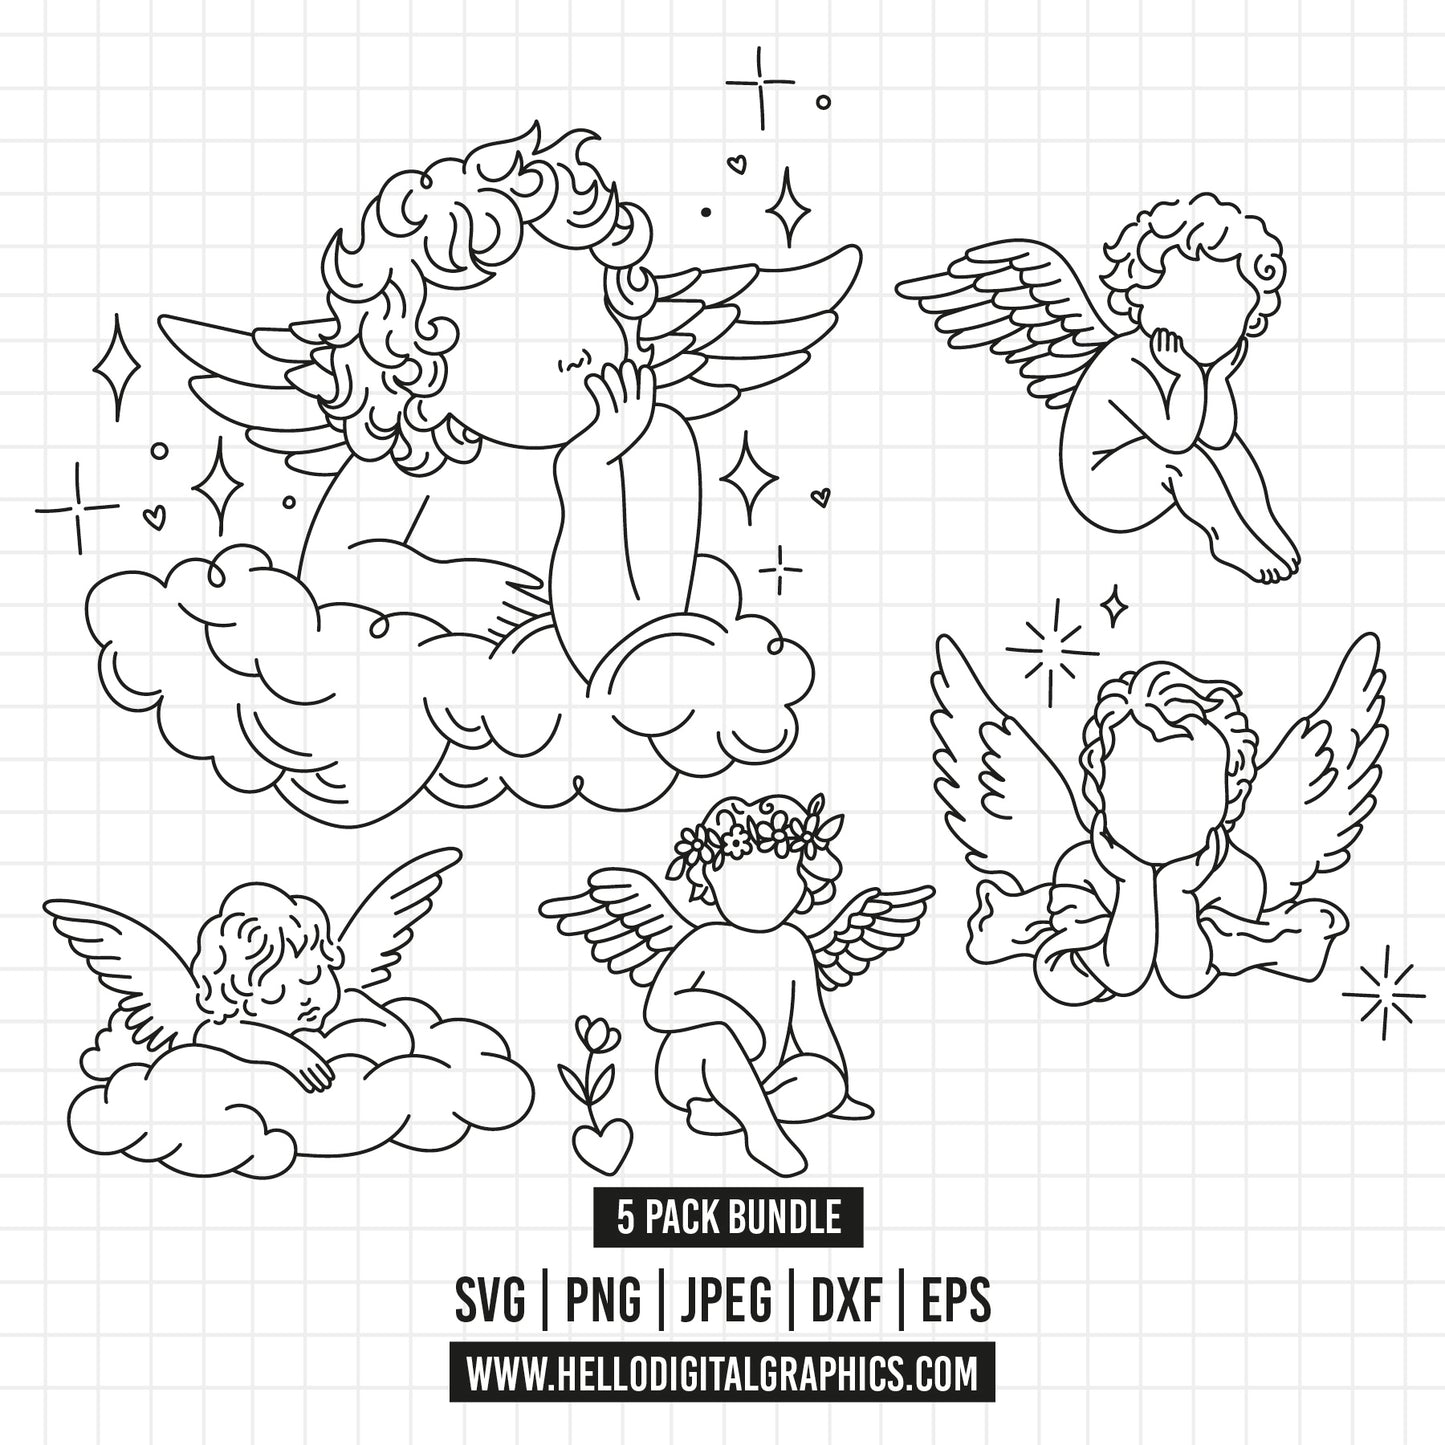 COD1276- cherub angel svg, a little angel clipart, cute angel png, angel on clouds dxf logo, vector eps cut files for cricut and silhouette use